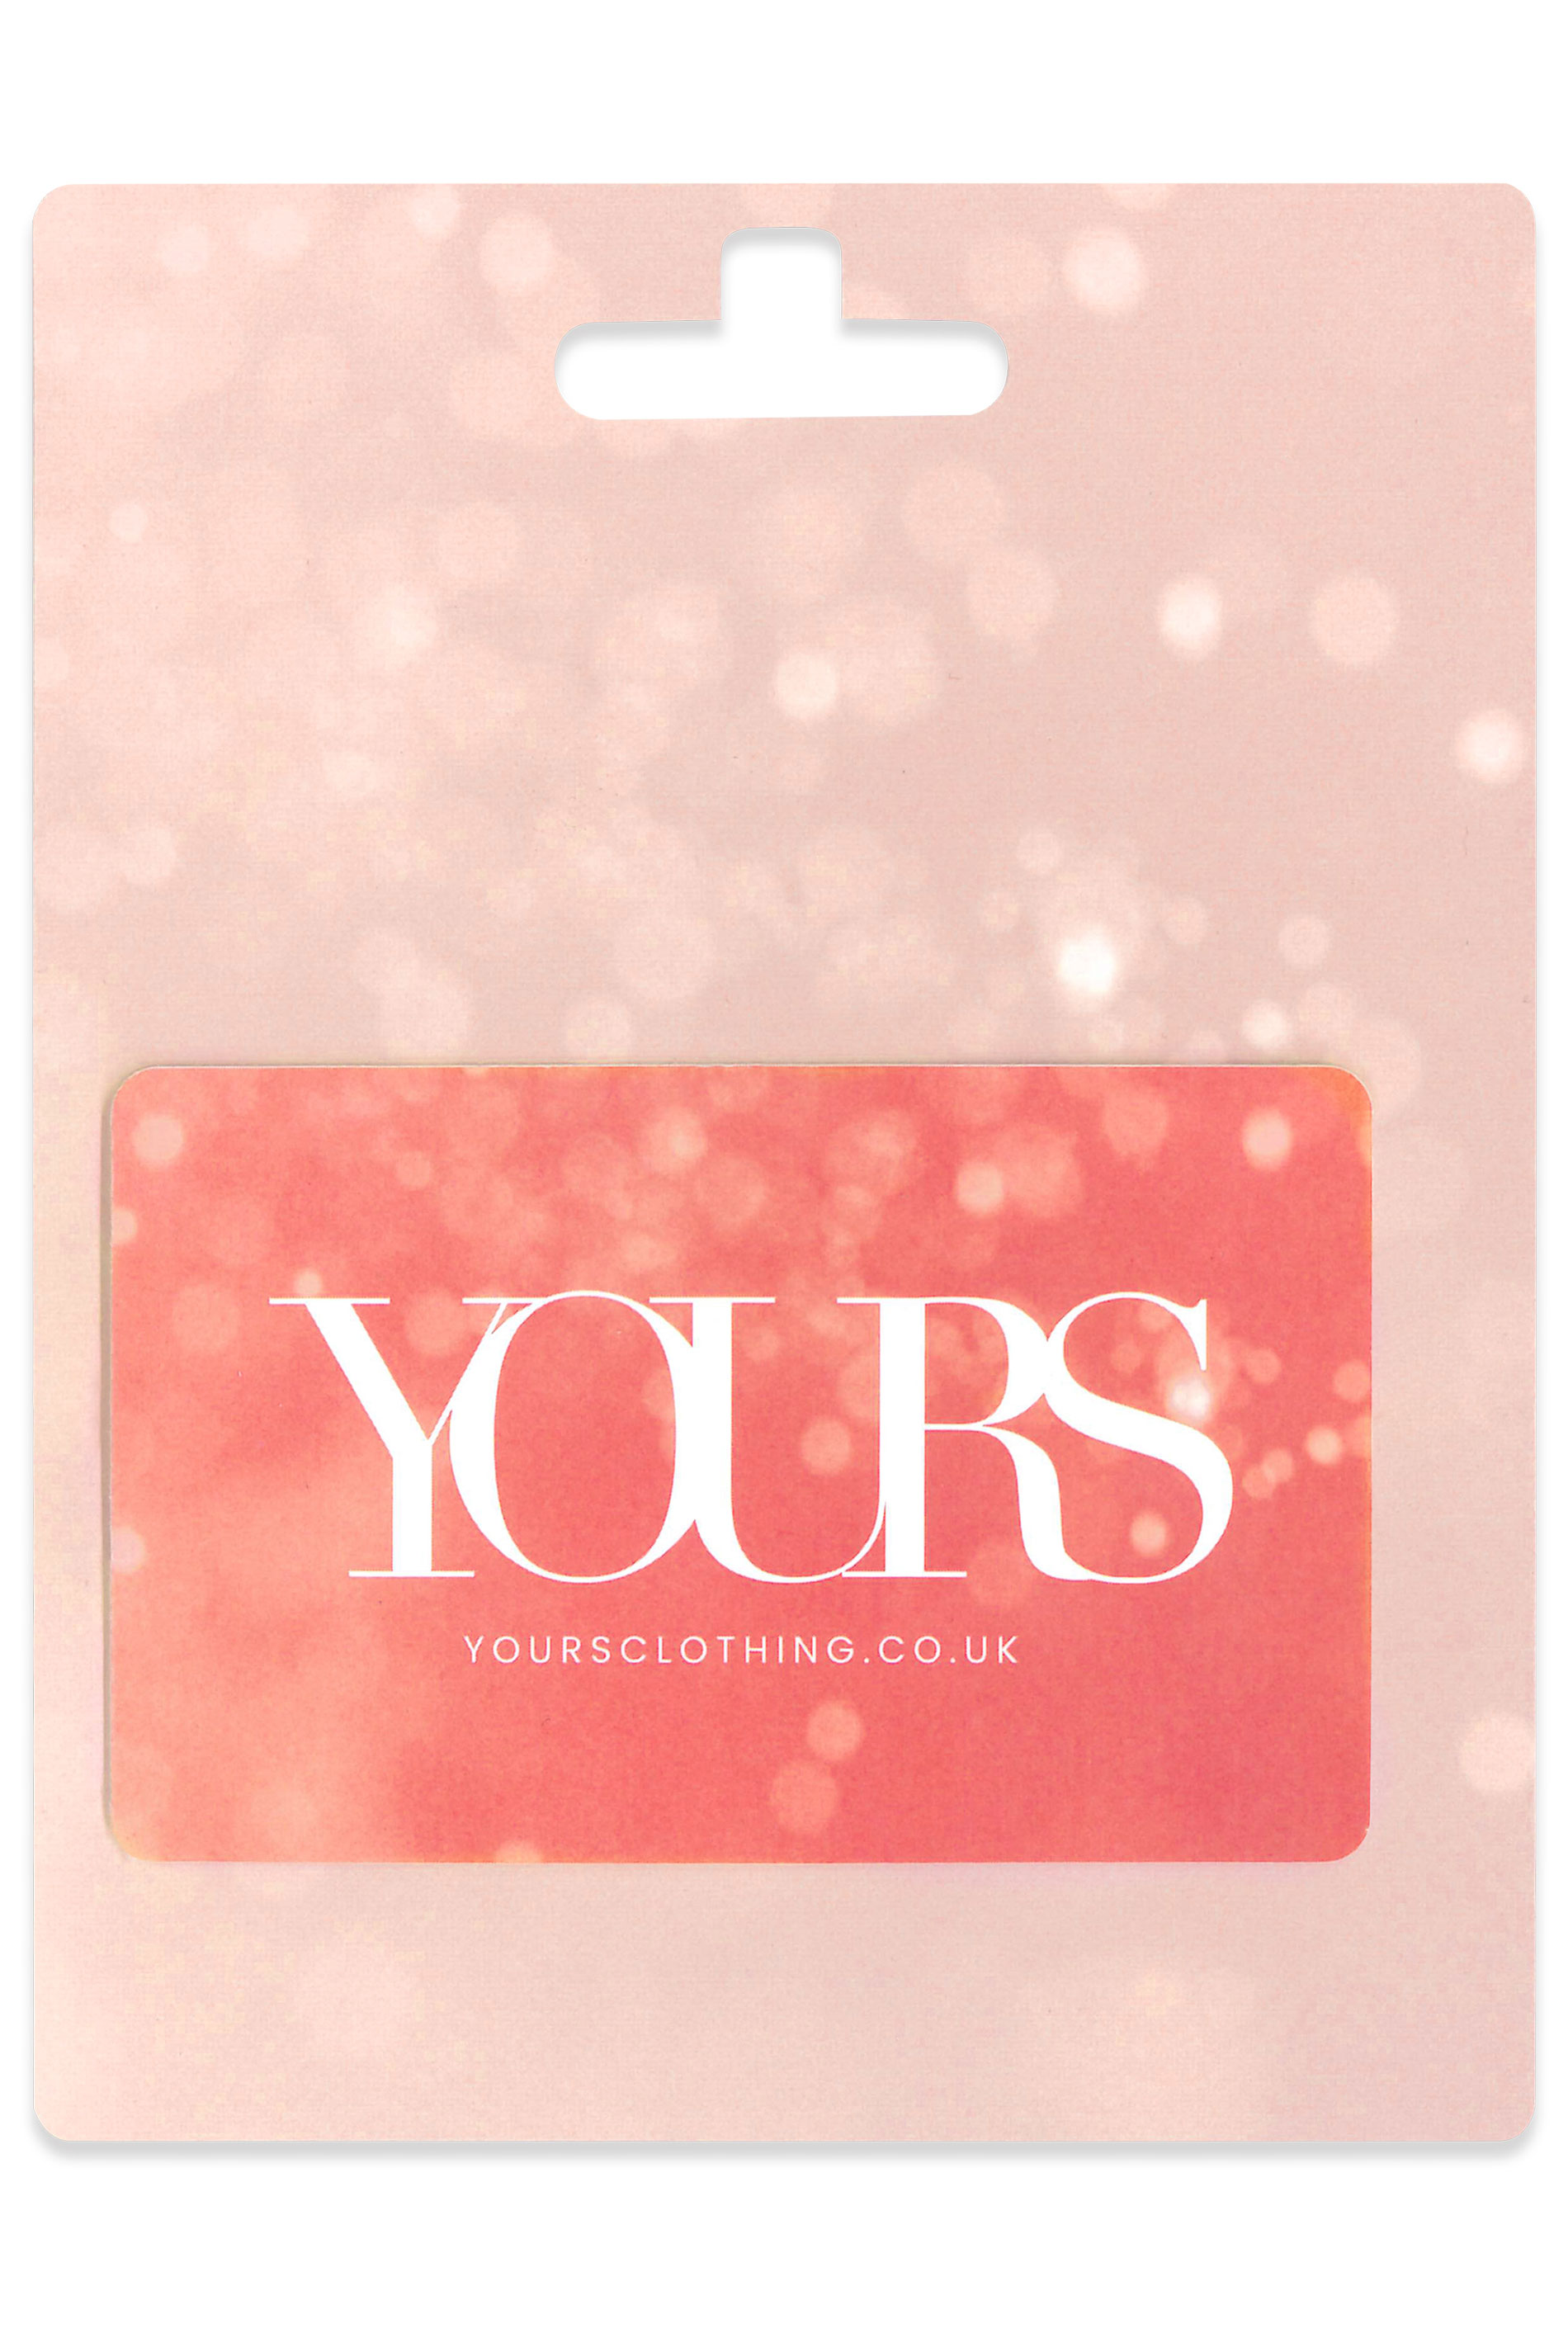 £10 - £150 Yours Clothing Glitter Gift Card 1